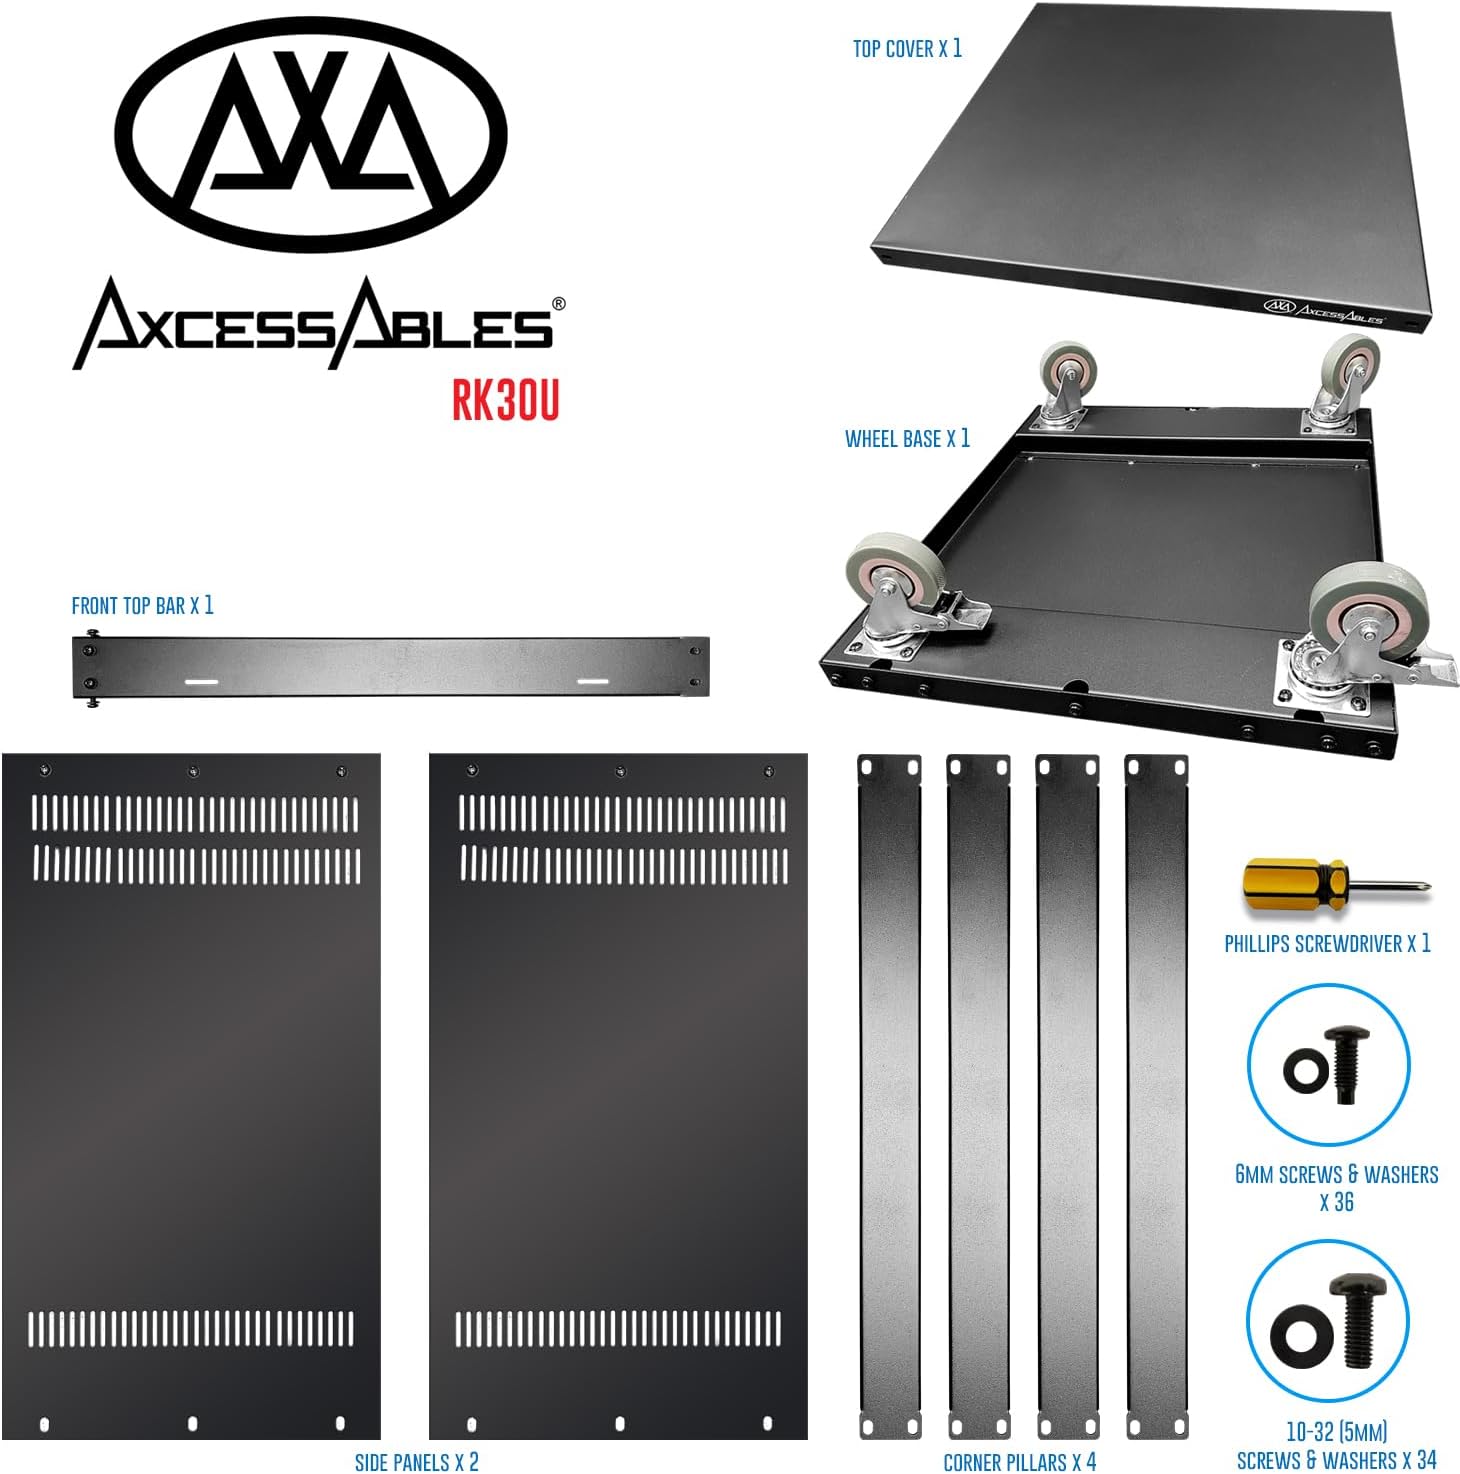 AxcessAbles RK 30U Rack-Mount Cabinet Case w/Caster Wheels (Compatible with US 10-32 (5mm) & European (6mm) Rack Standards.) Rack for AV, DJ, Home Theater, Network, Server, Computer, Electronics